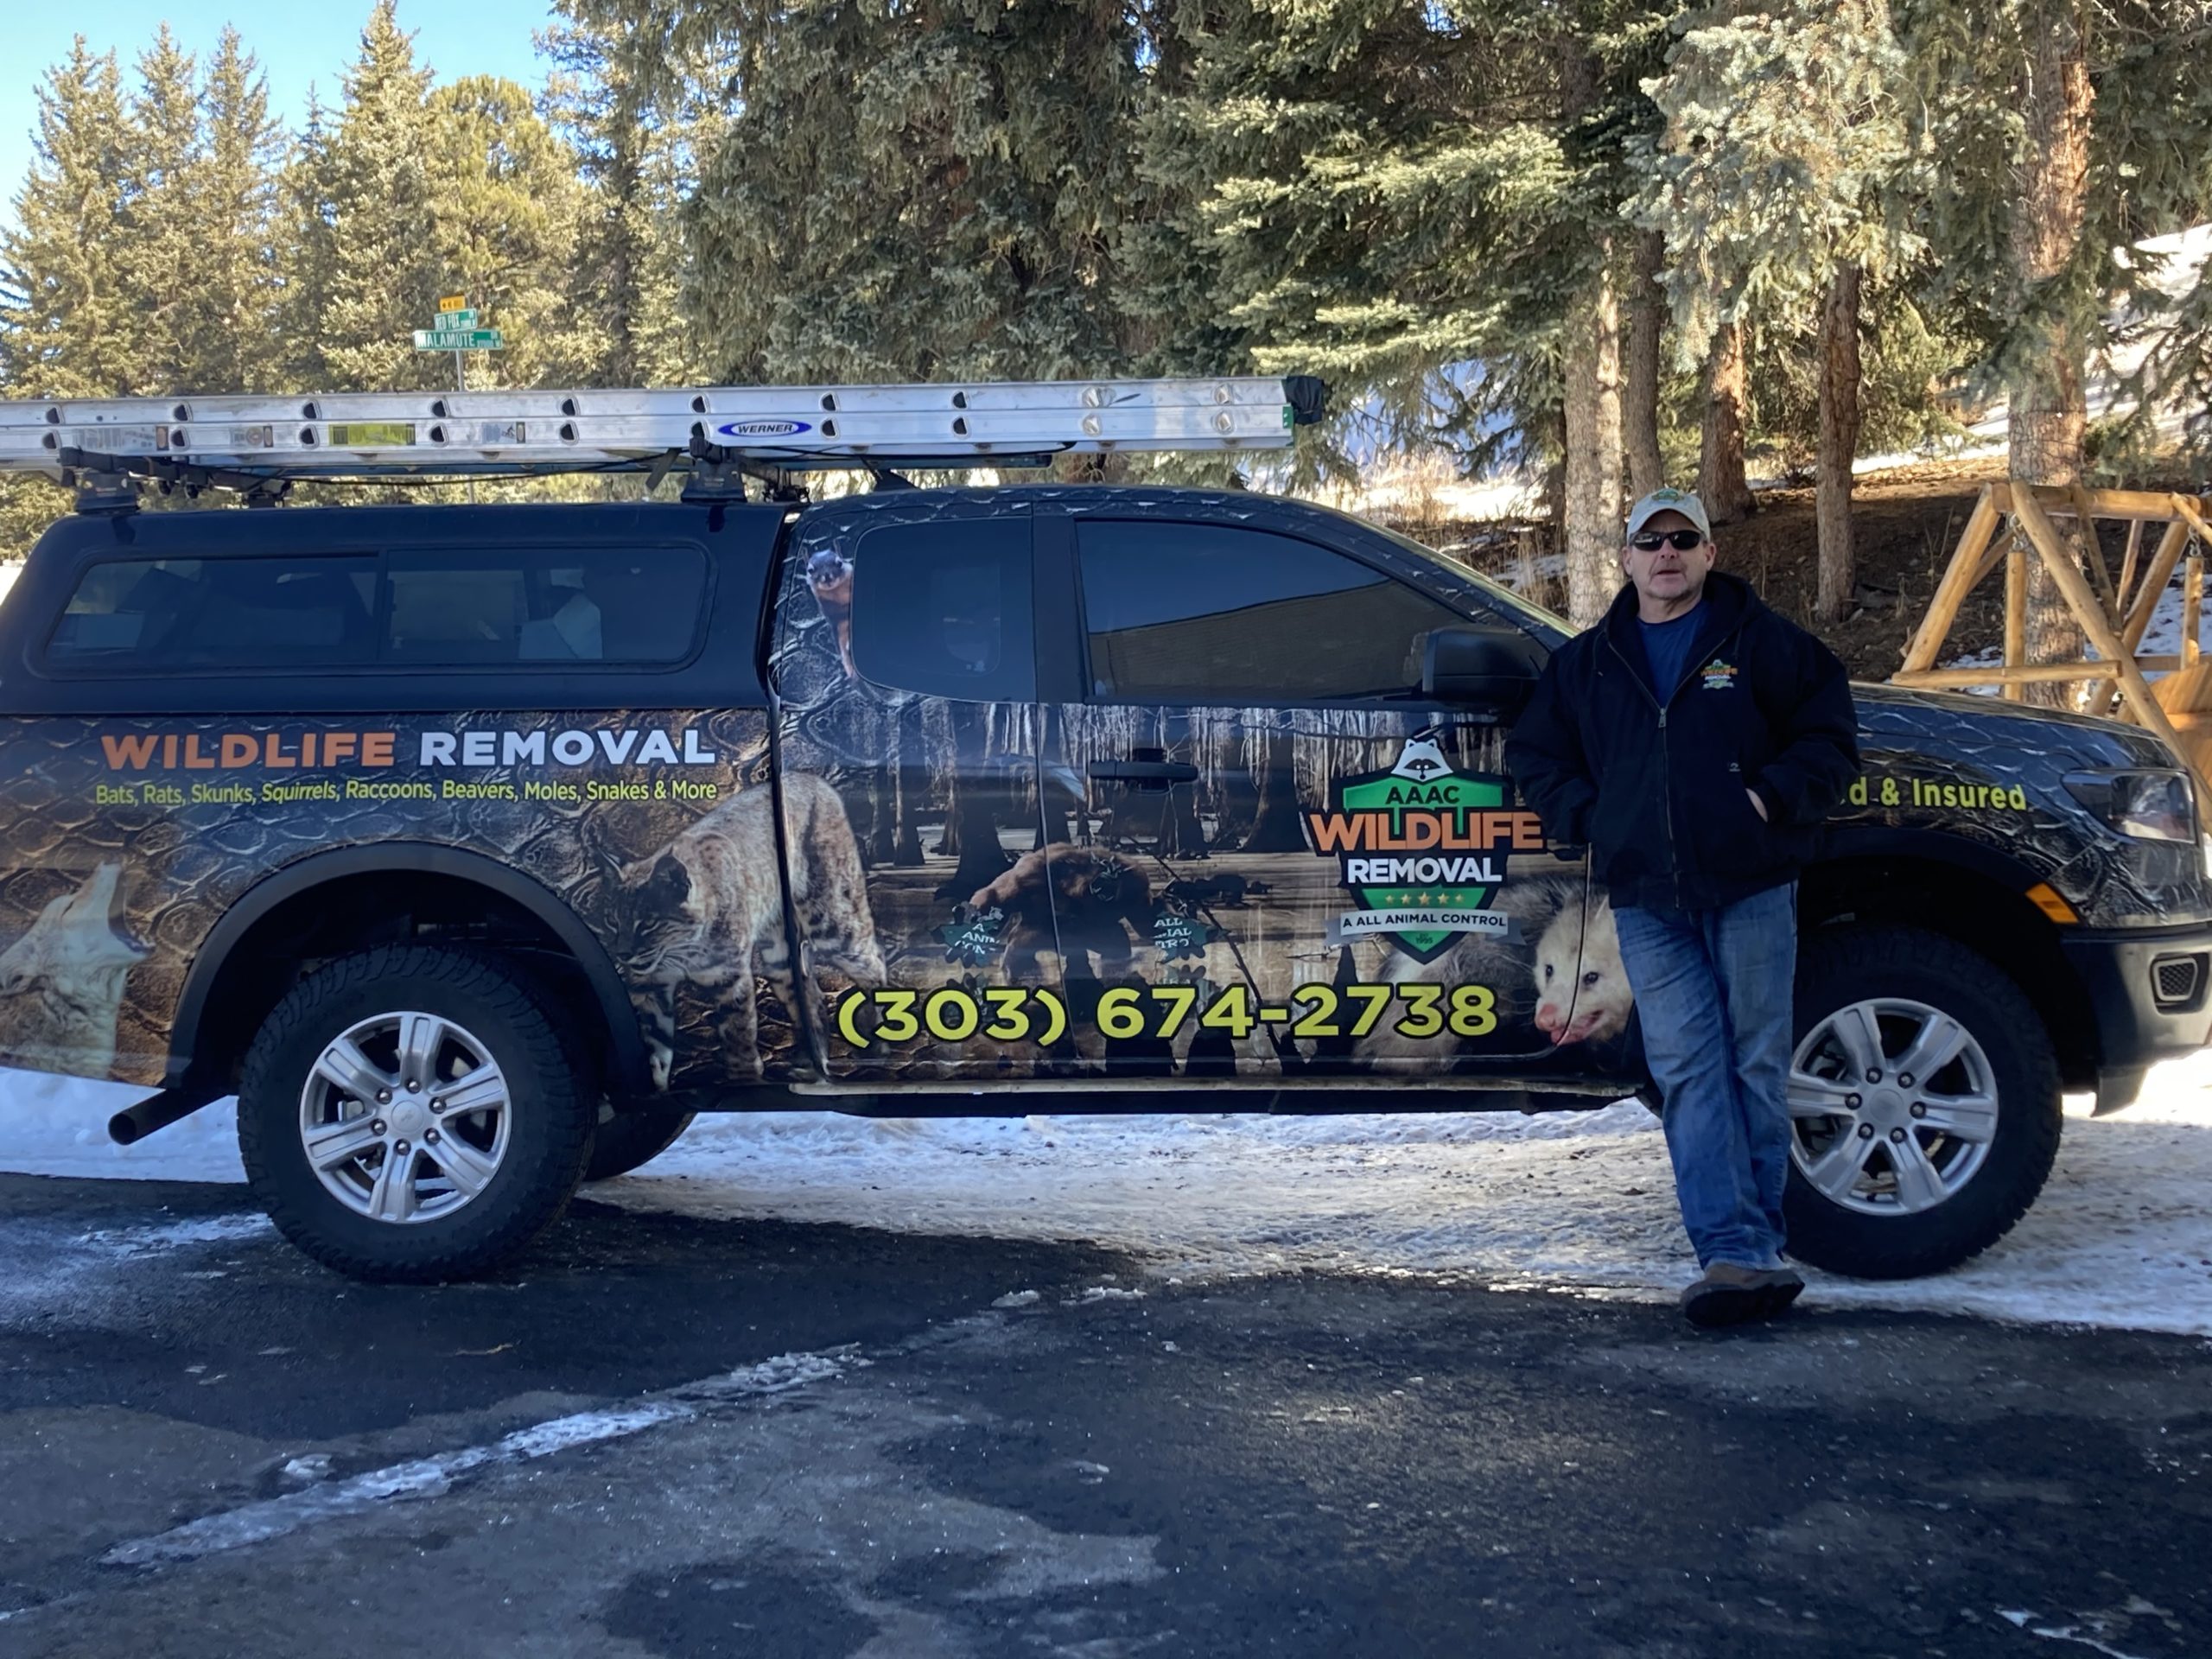 AAAC Wildlife Removal Owner, Dean Grose, standing in front of his wildlife removal truck